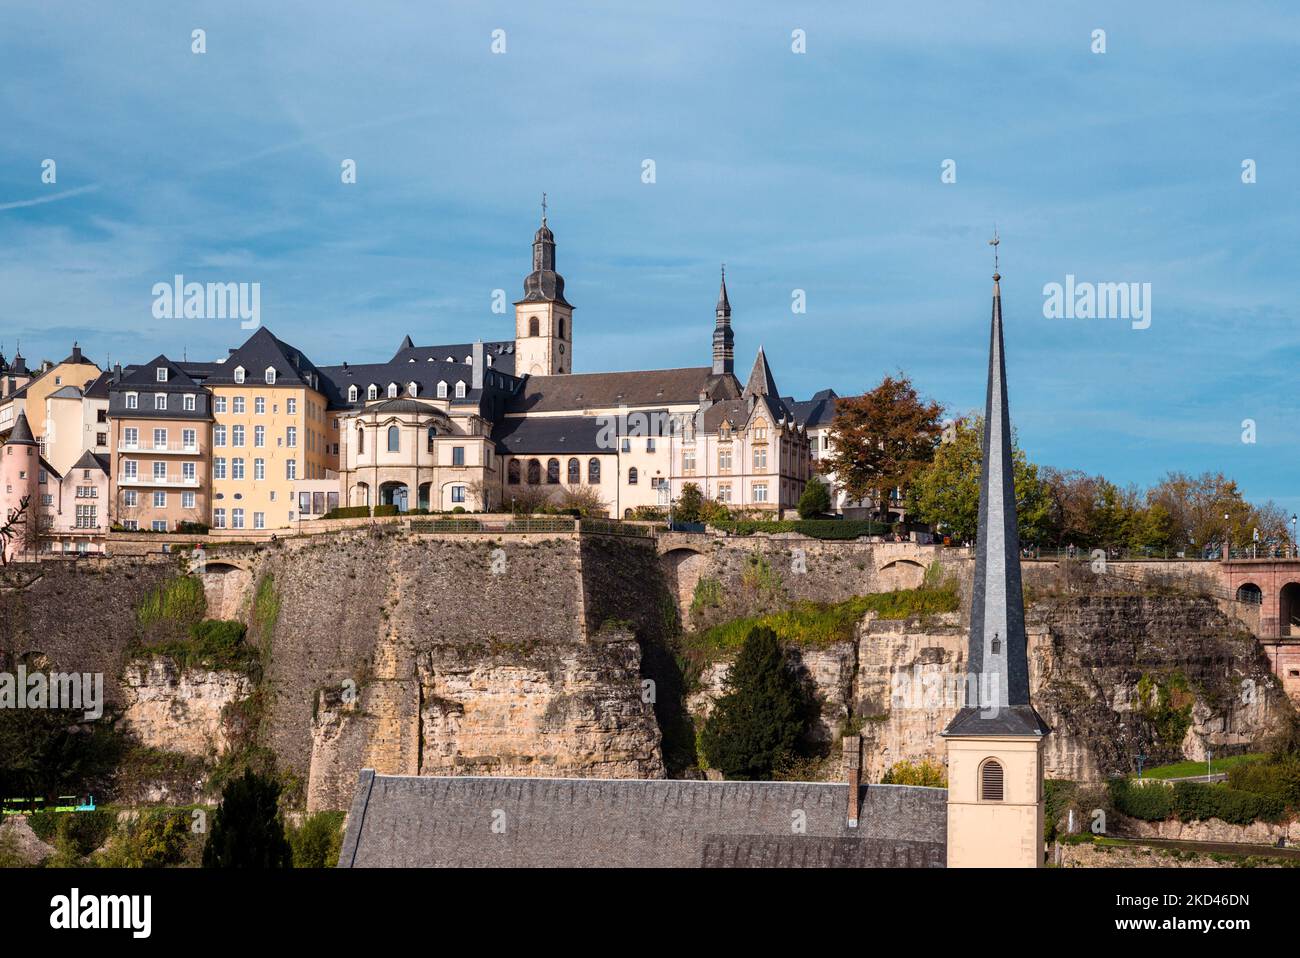 Luxembourg historic centre seen from Grund quarter Stock Photo